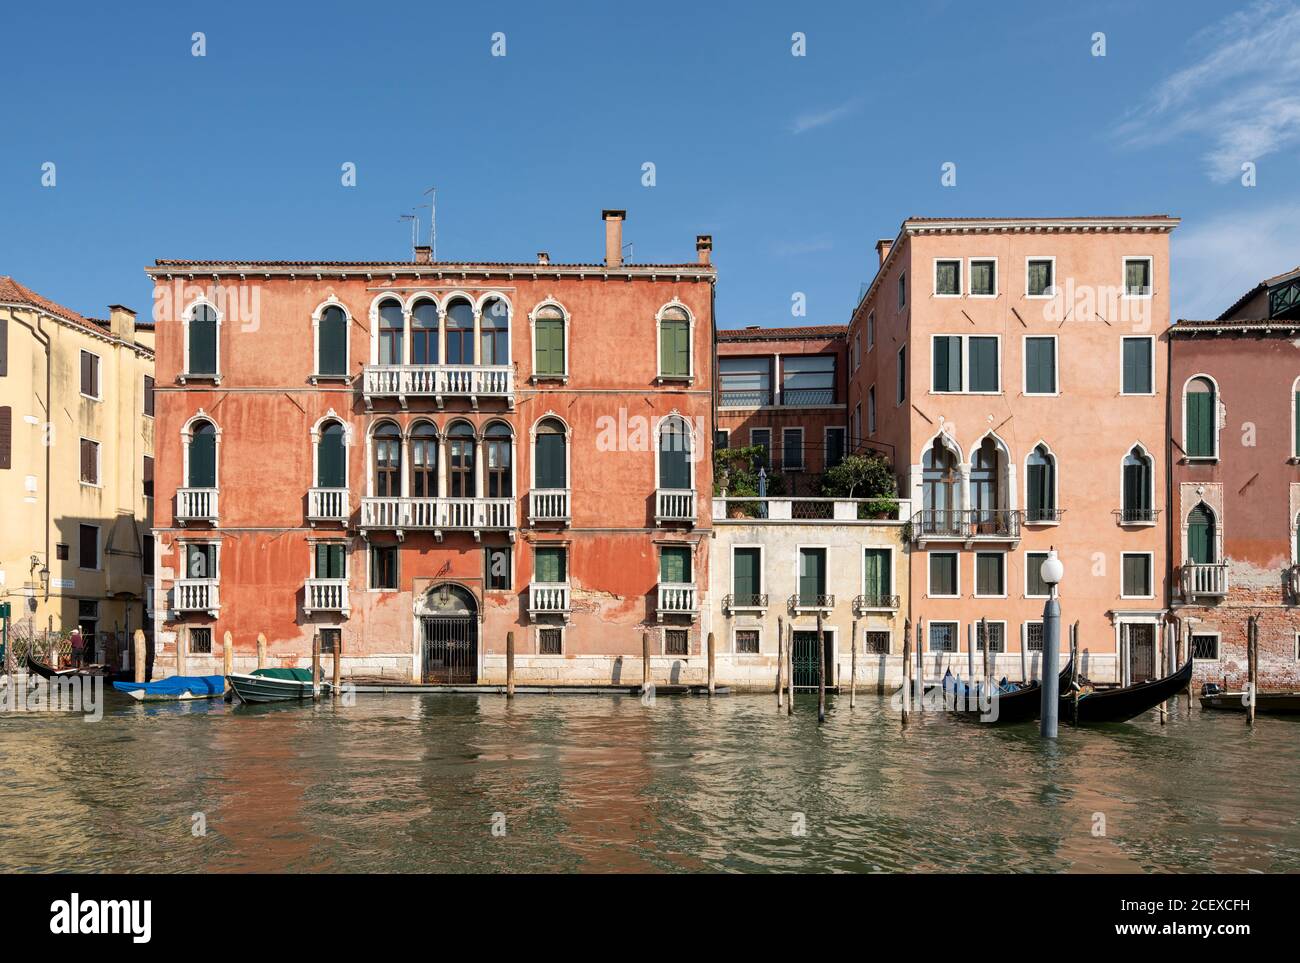 Veneig, Canal Grande, Palazzo Giustininian Persico, rechts Palazzo Tiepolo Passi, Auch Palazzetto Tiepolo, Palazzo Tiepoletto Passi oder CA' Tiepoletto Passi genannt Banque D'Images